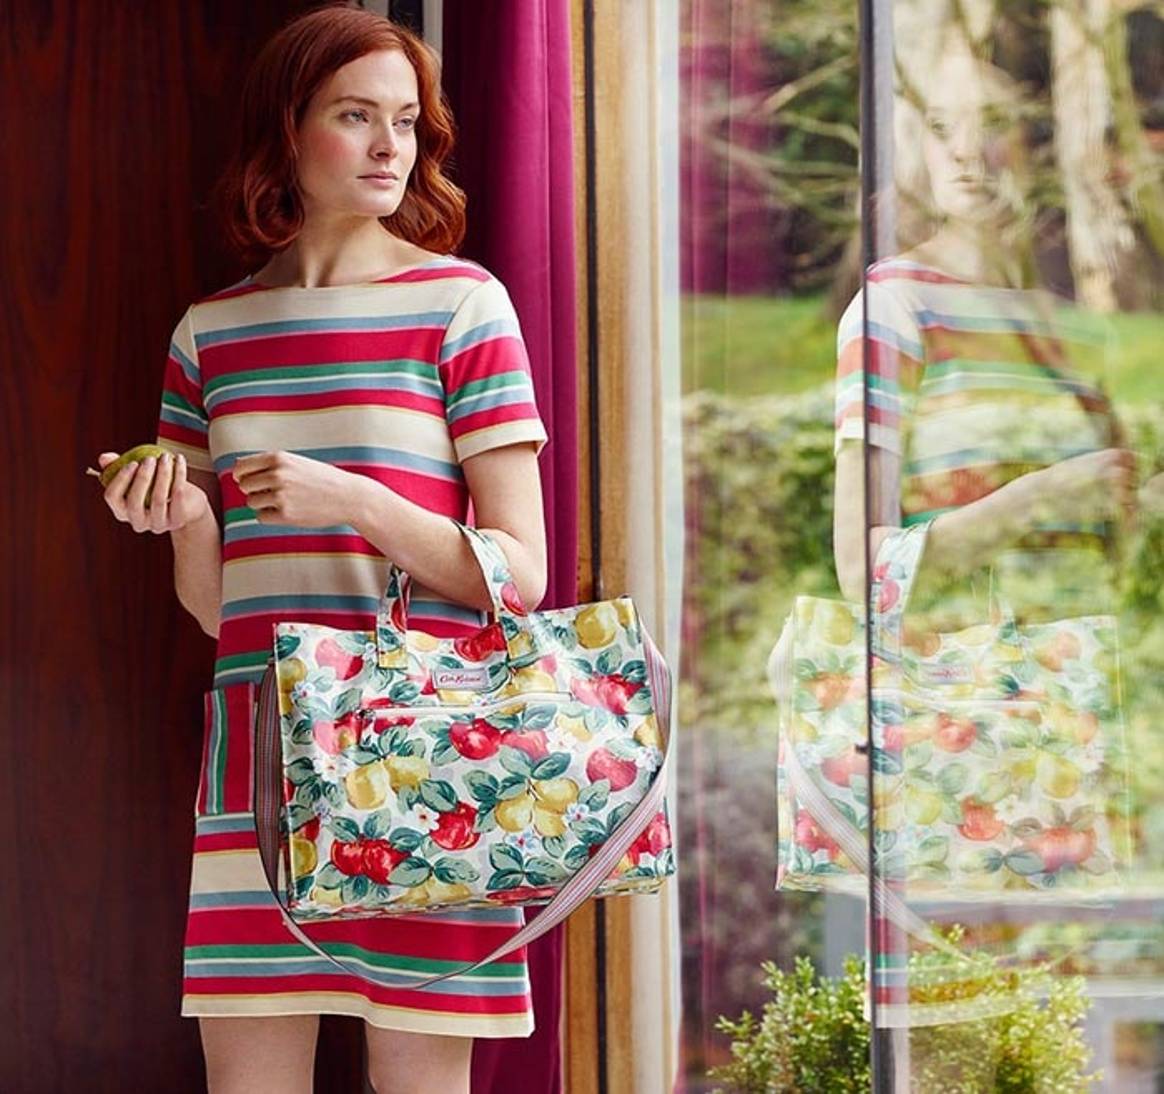 Cath Kidston exits role at eponymous brand